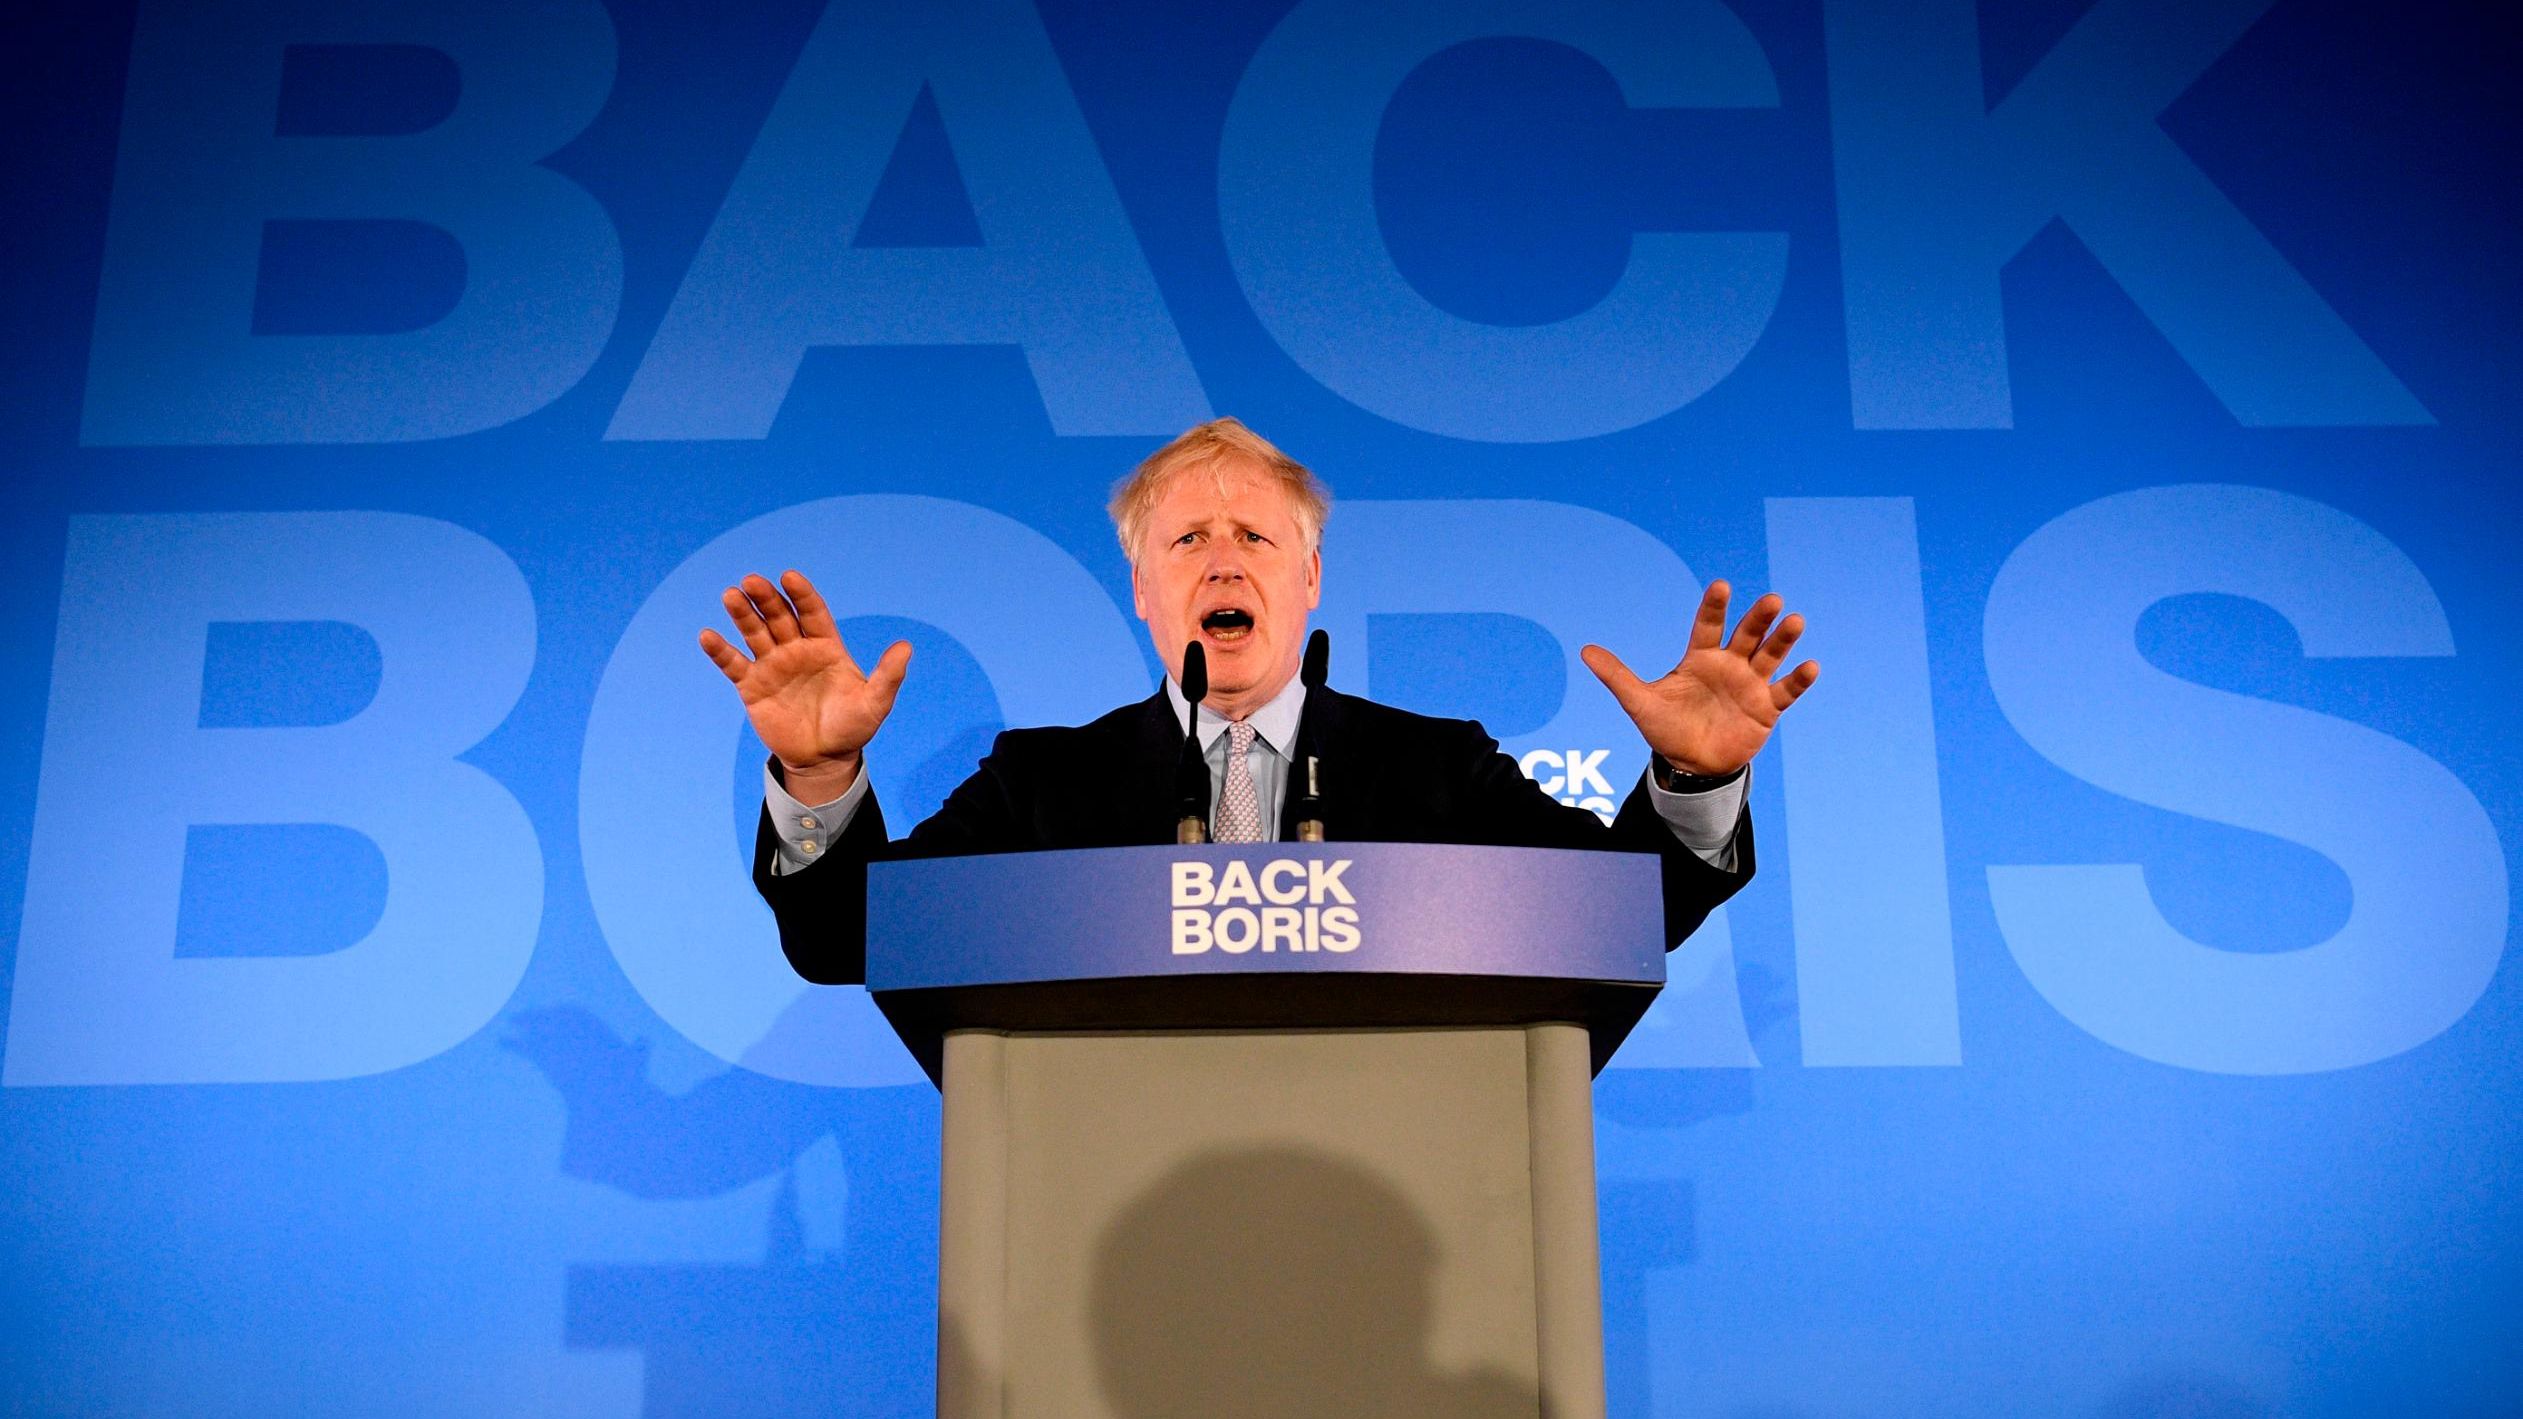 Johnson launches his Conservative Party leadership campaign in June 2019.